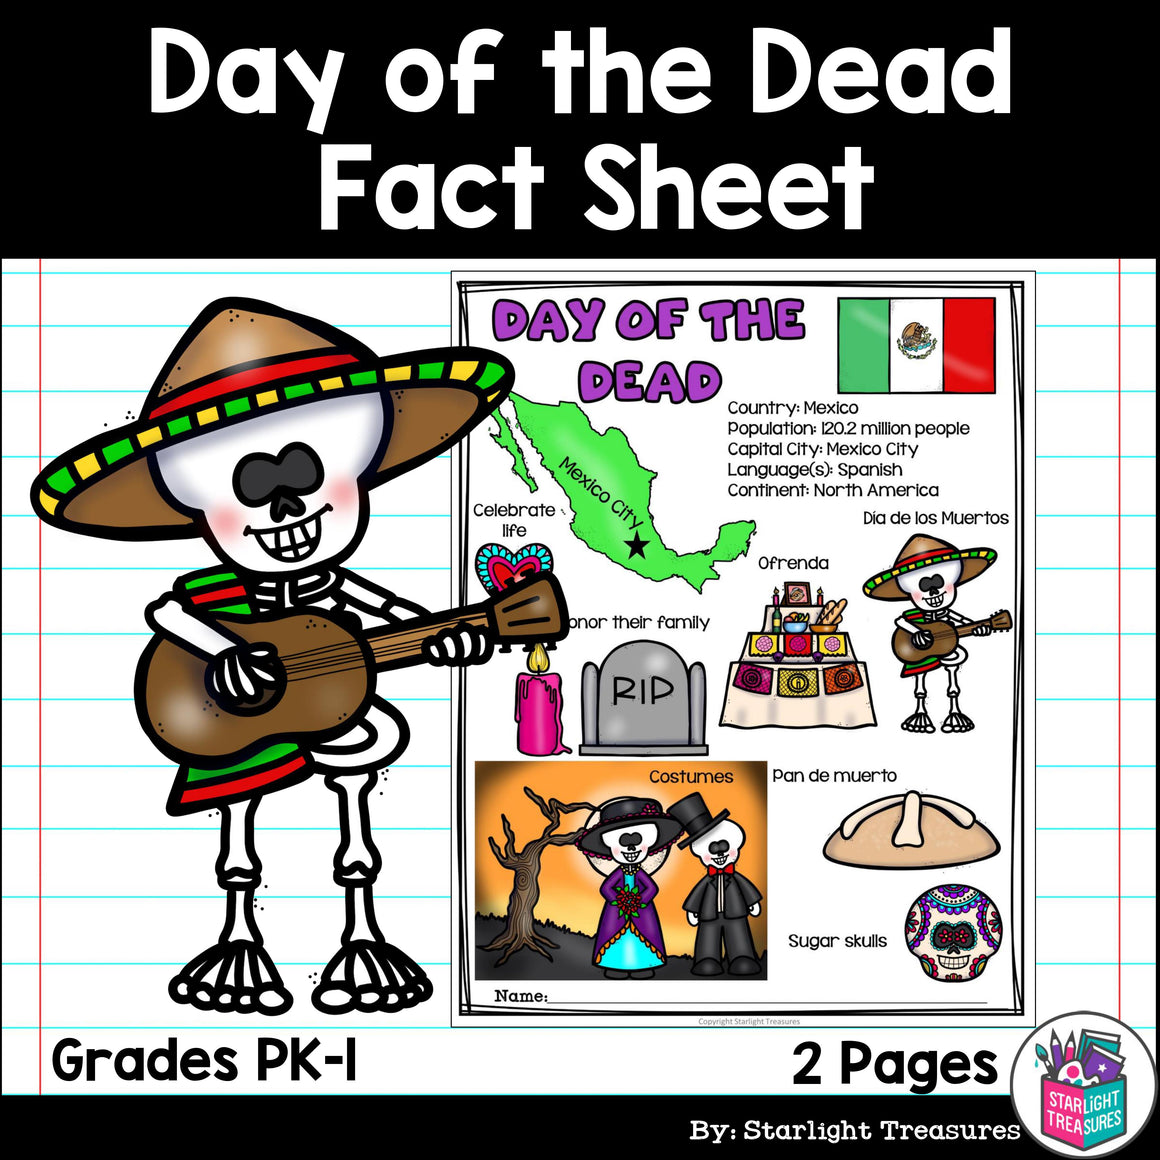 day-of-the-dead-fact-sheet-for-early-readers-starlight-treasures-llc